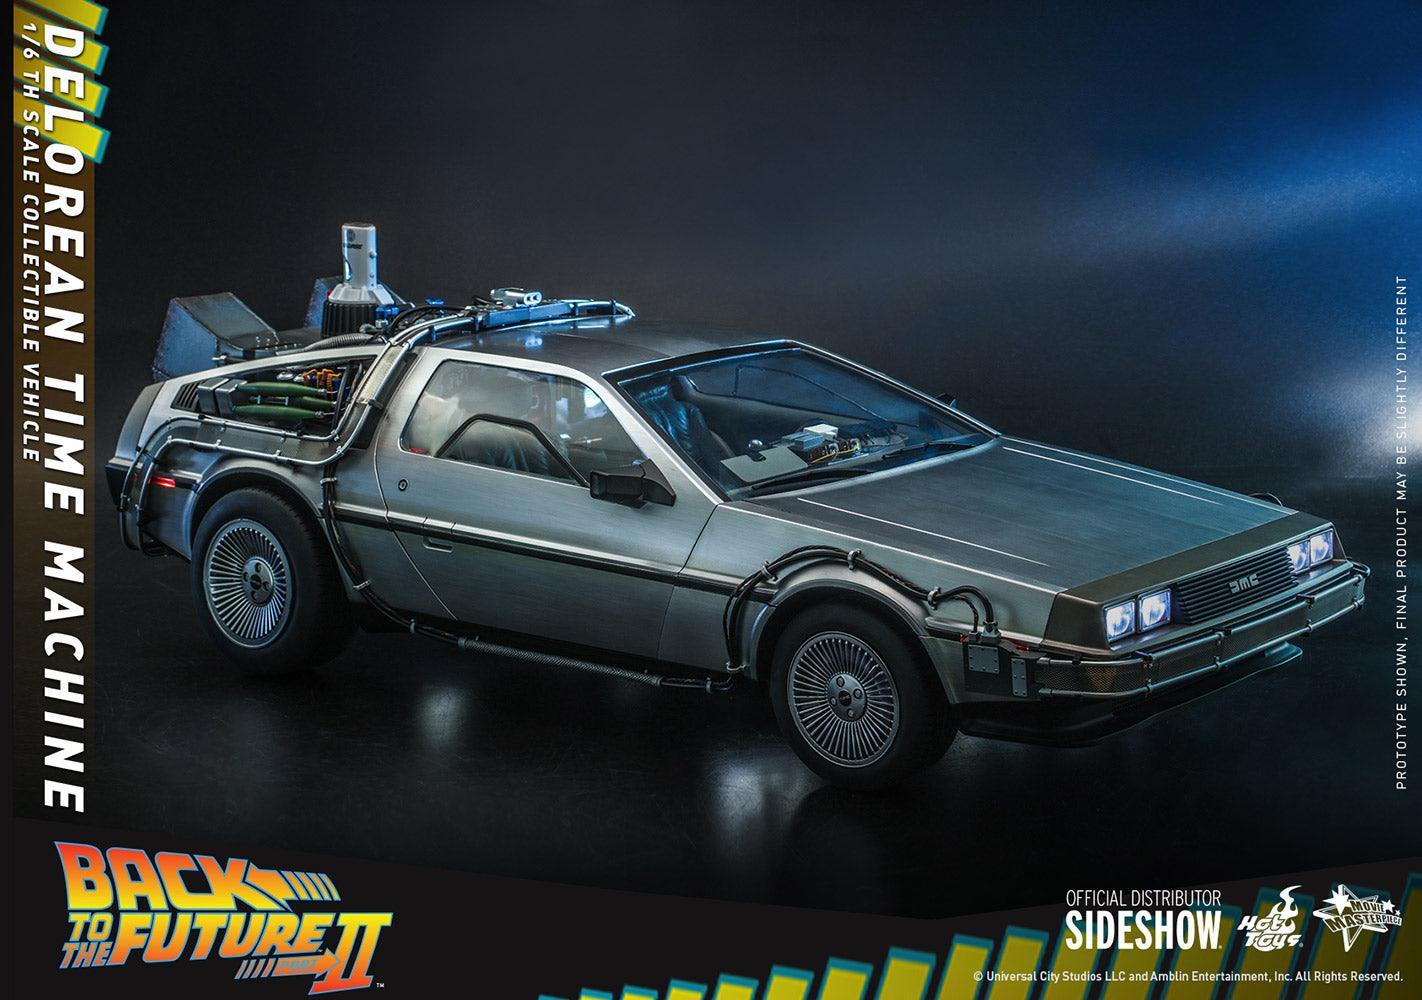 BACK TO THE FUTURE II DeLorean Magnetic Levitating 350€, By Retro Toys  Store